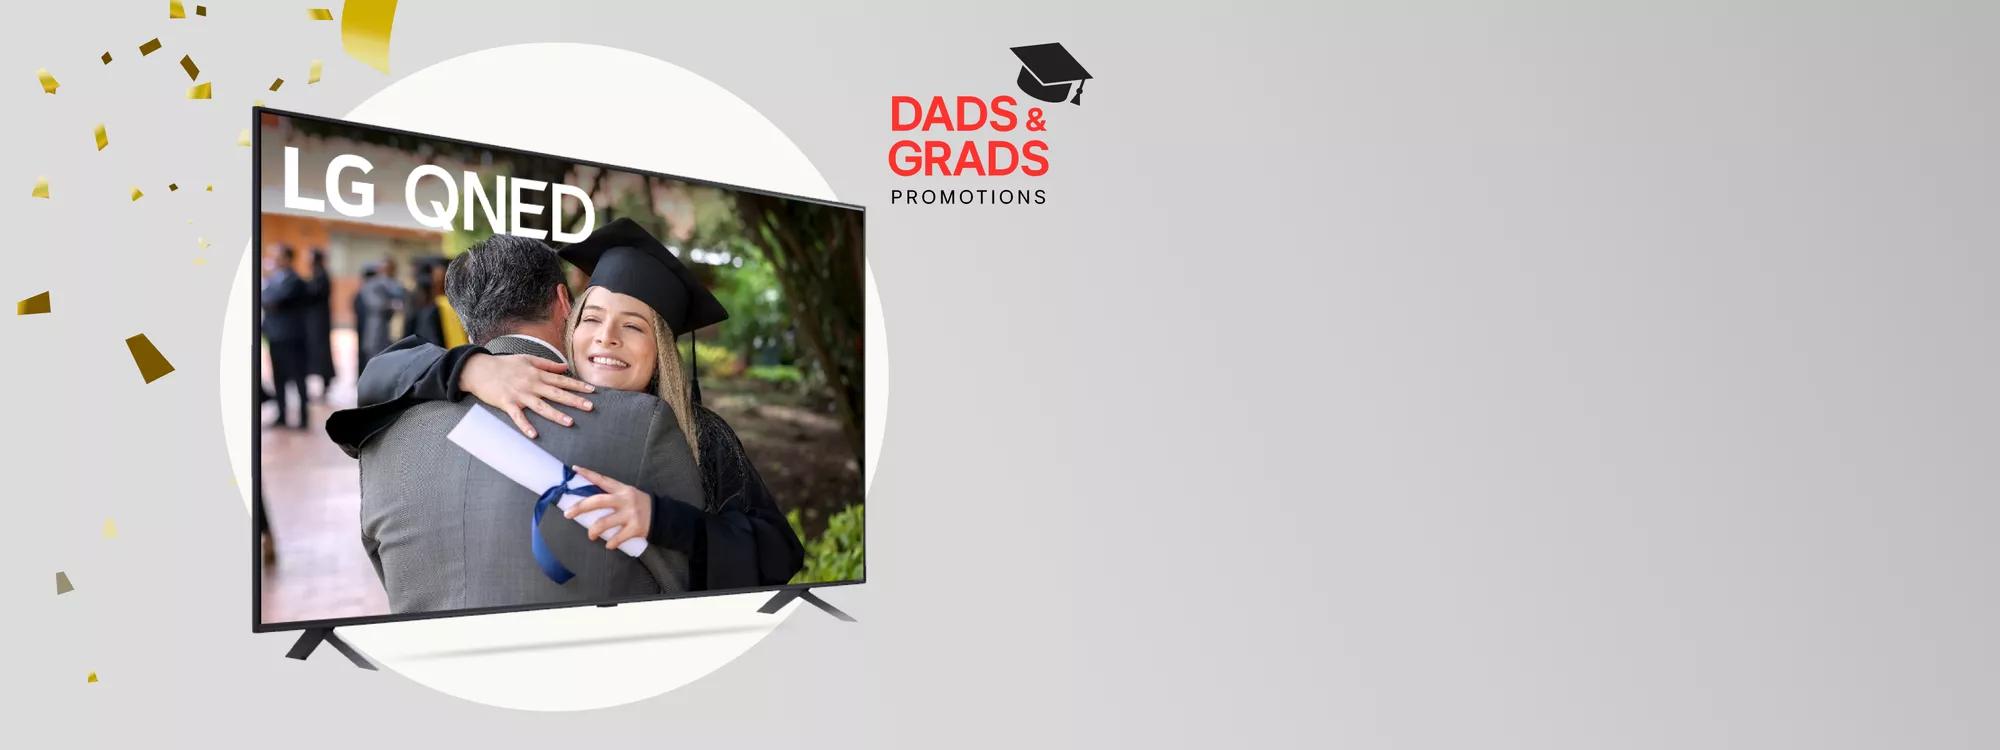 Dads and Grads Promotion - Make memories colorful with up to $1,100 off select QNED TVs